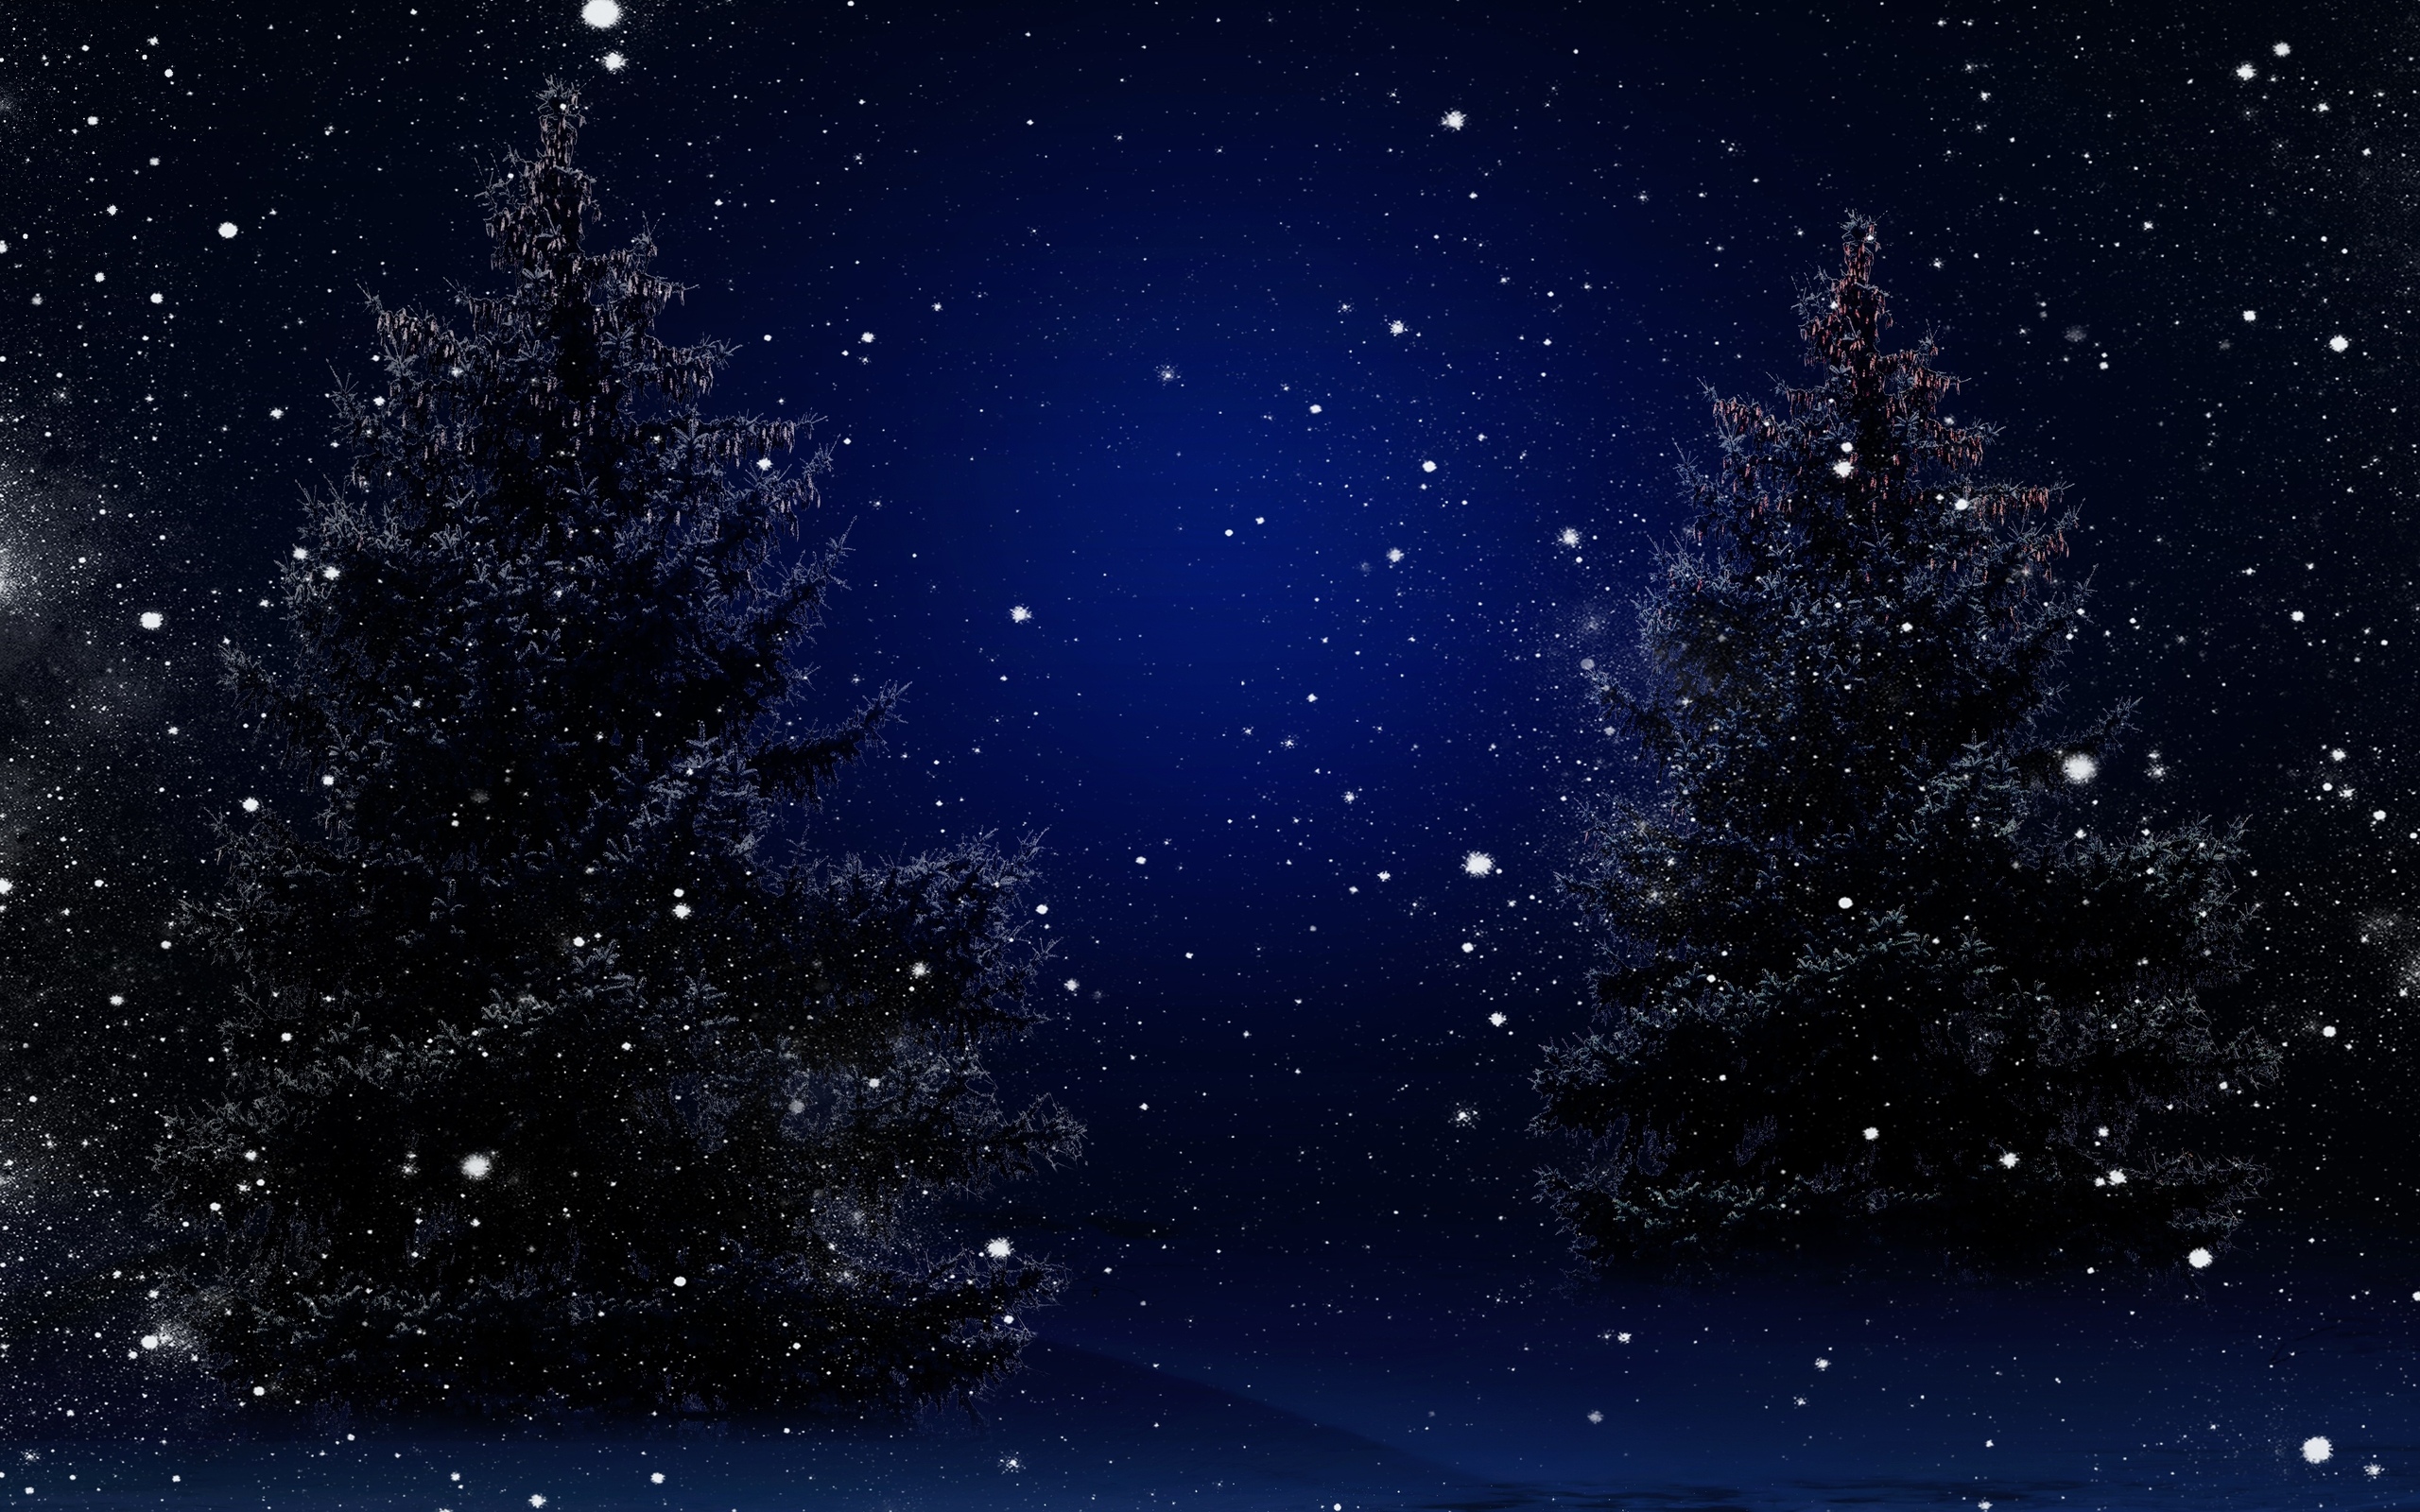 A Dreamy Christmas Night Wallpapers